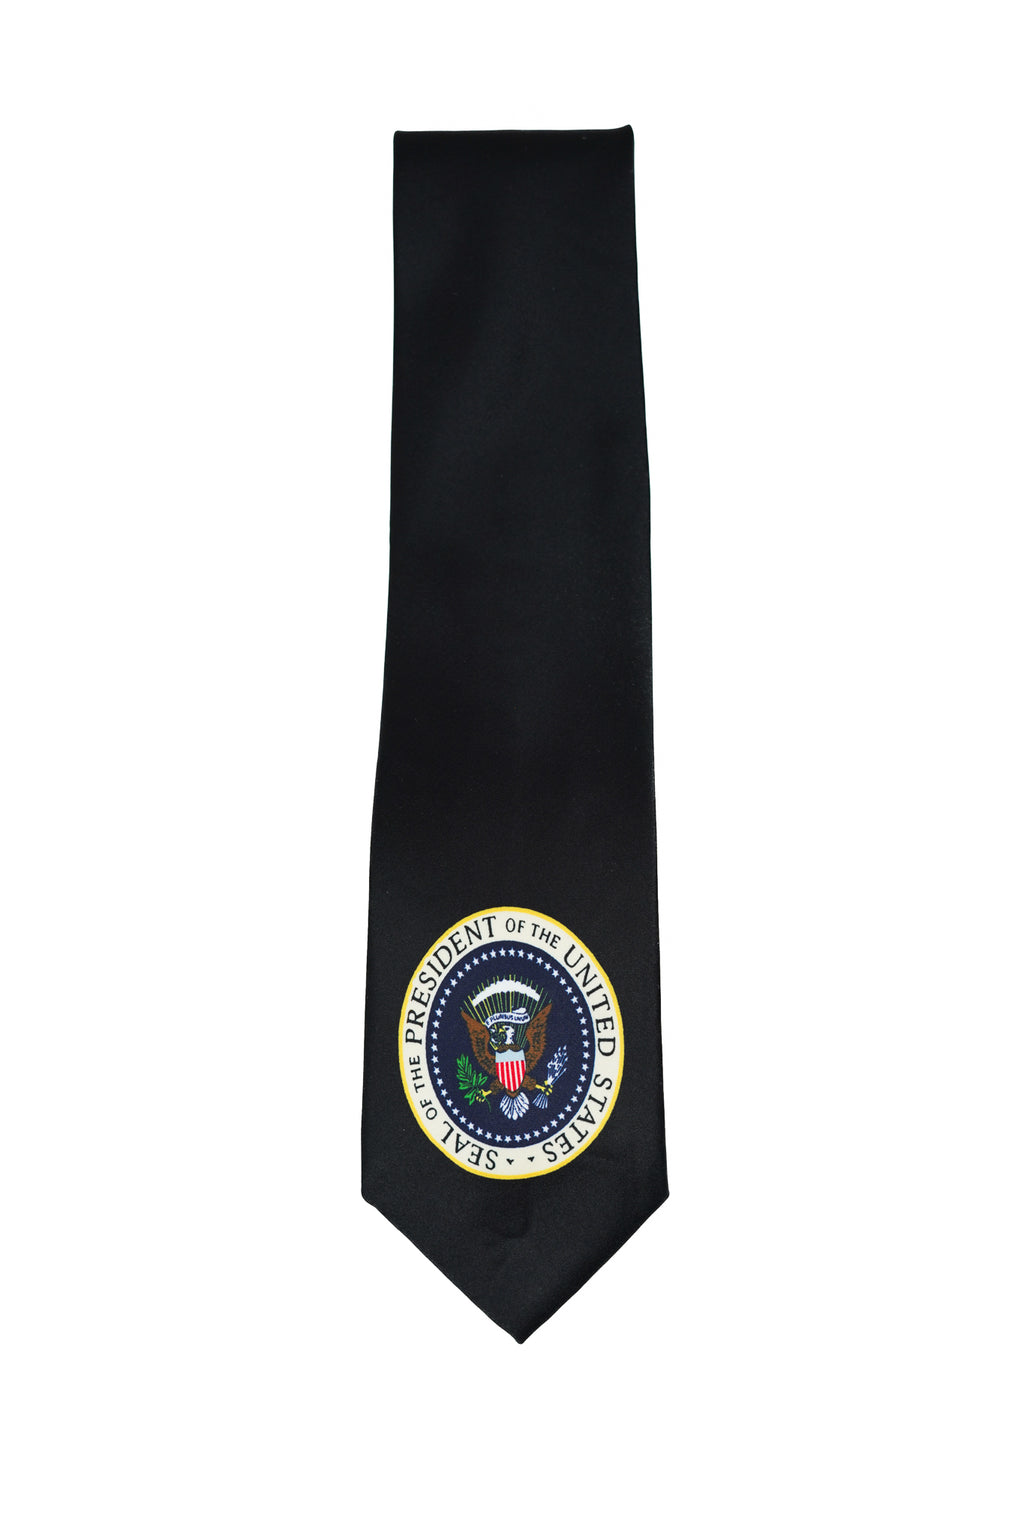 Black Tie with Presidential Seal